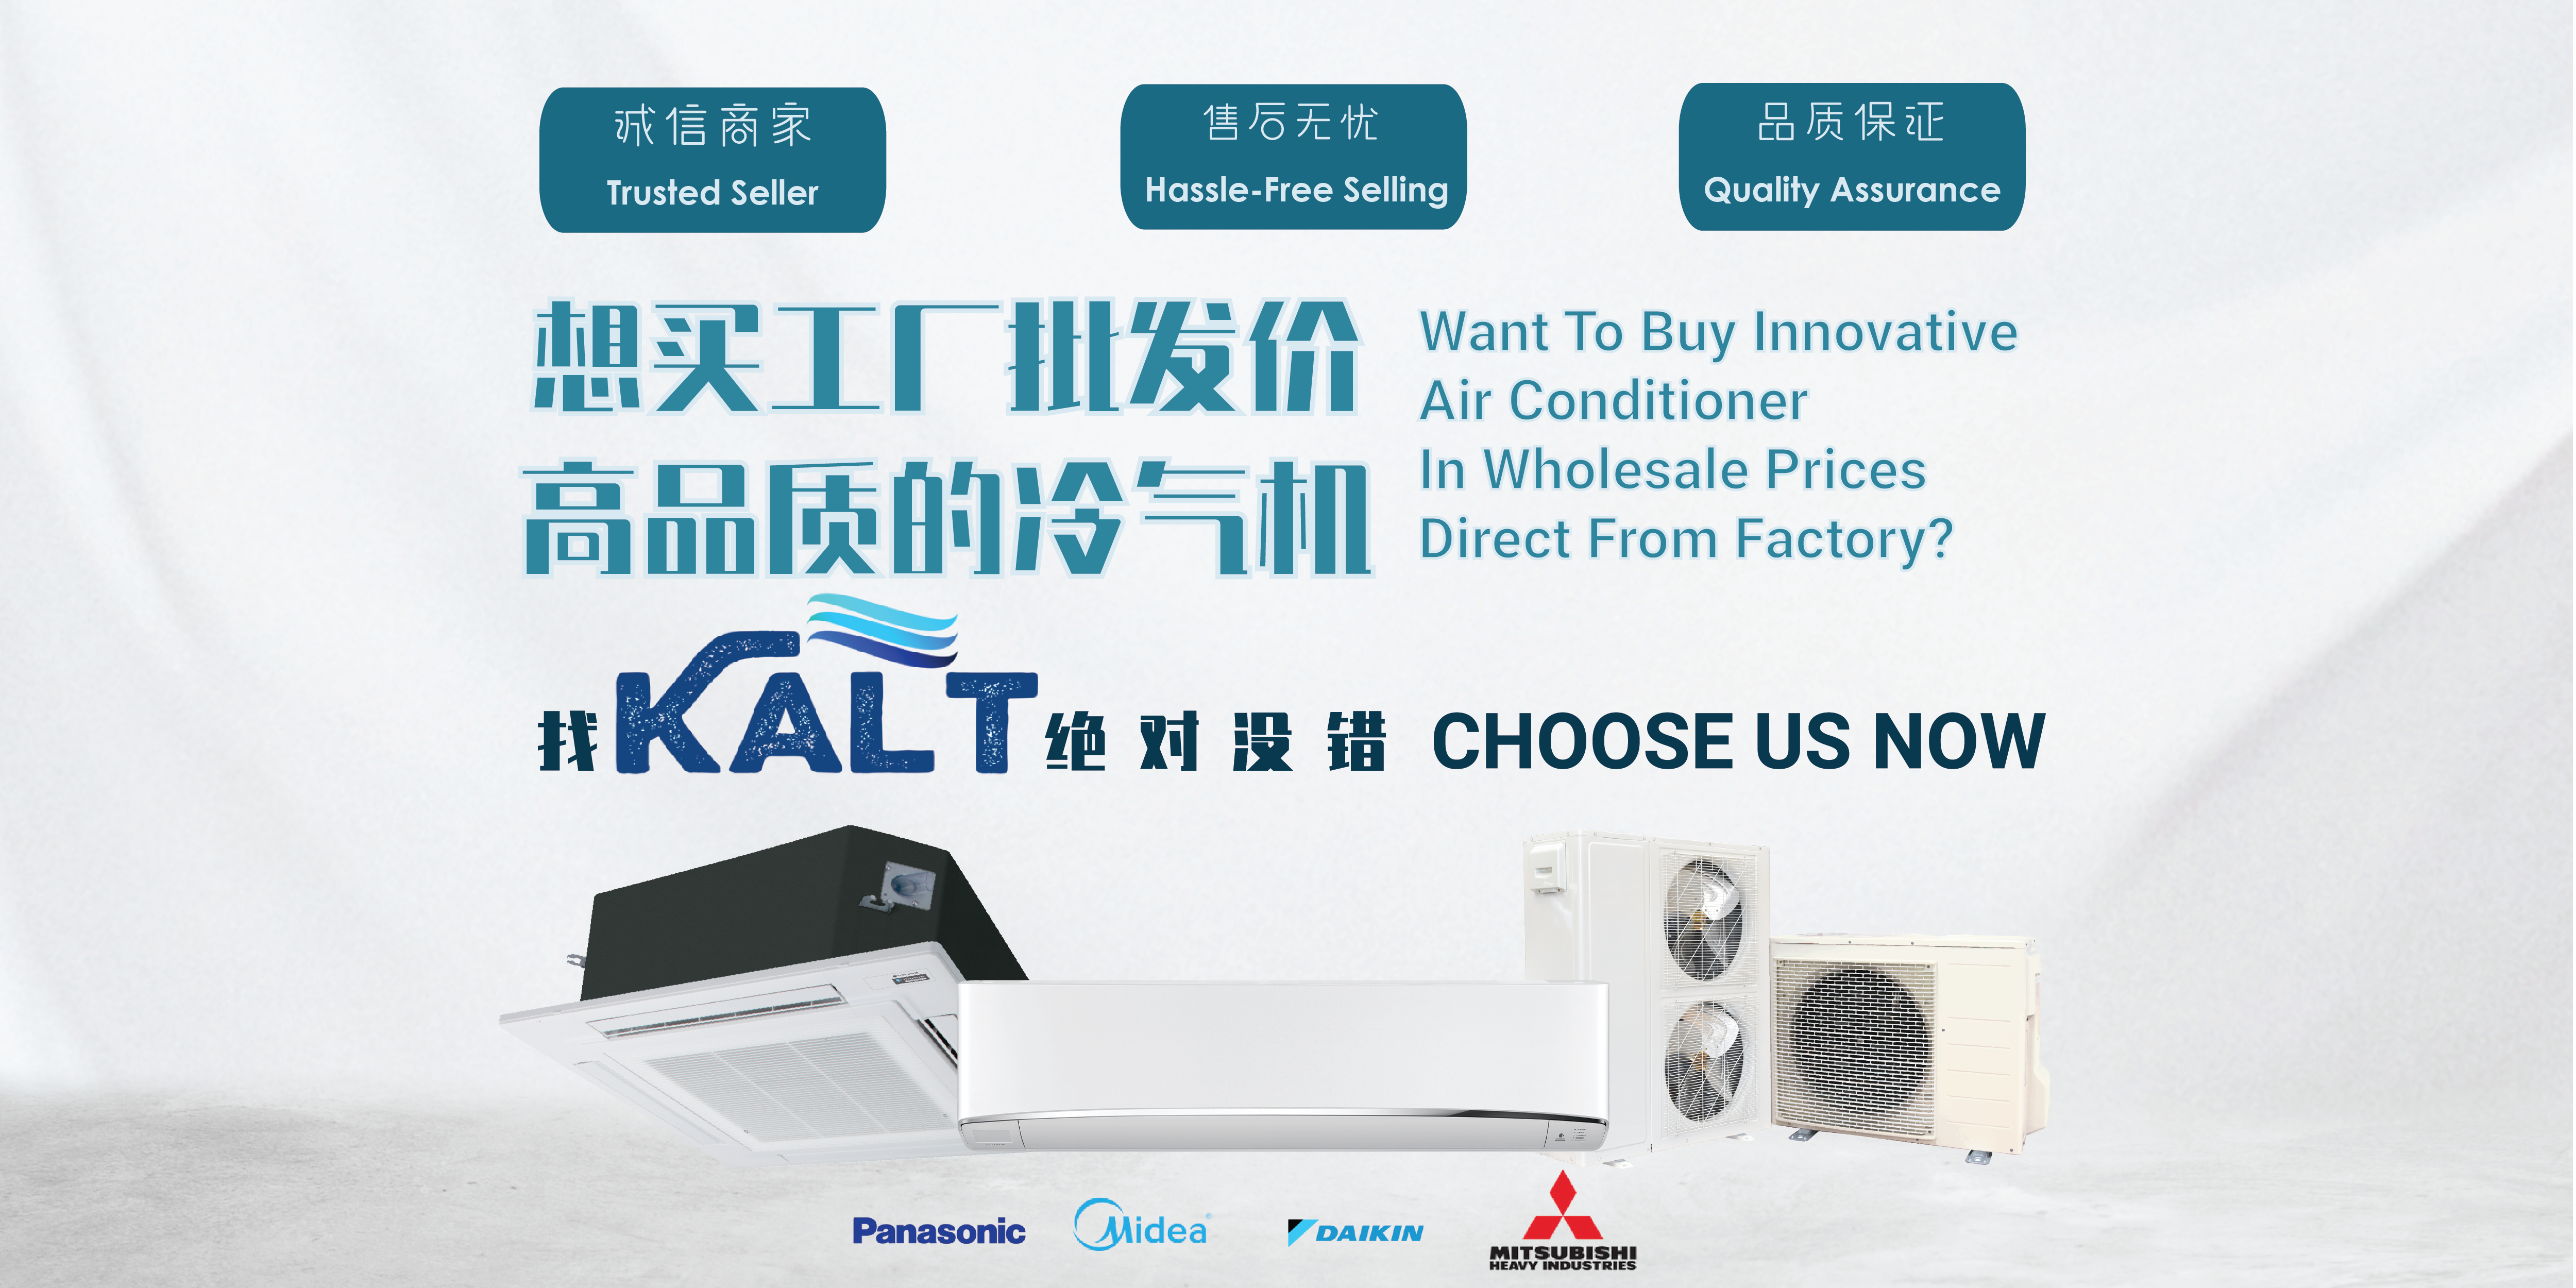 We are Air Conditioner Specialist - Selling Air Cond in Cheapest Price